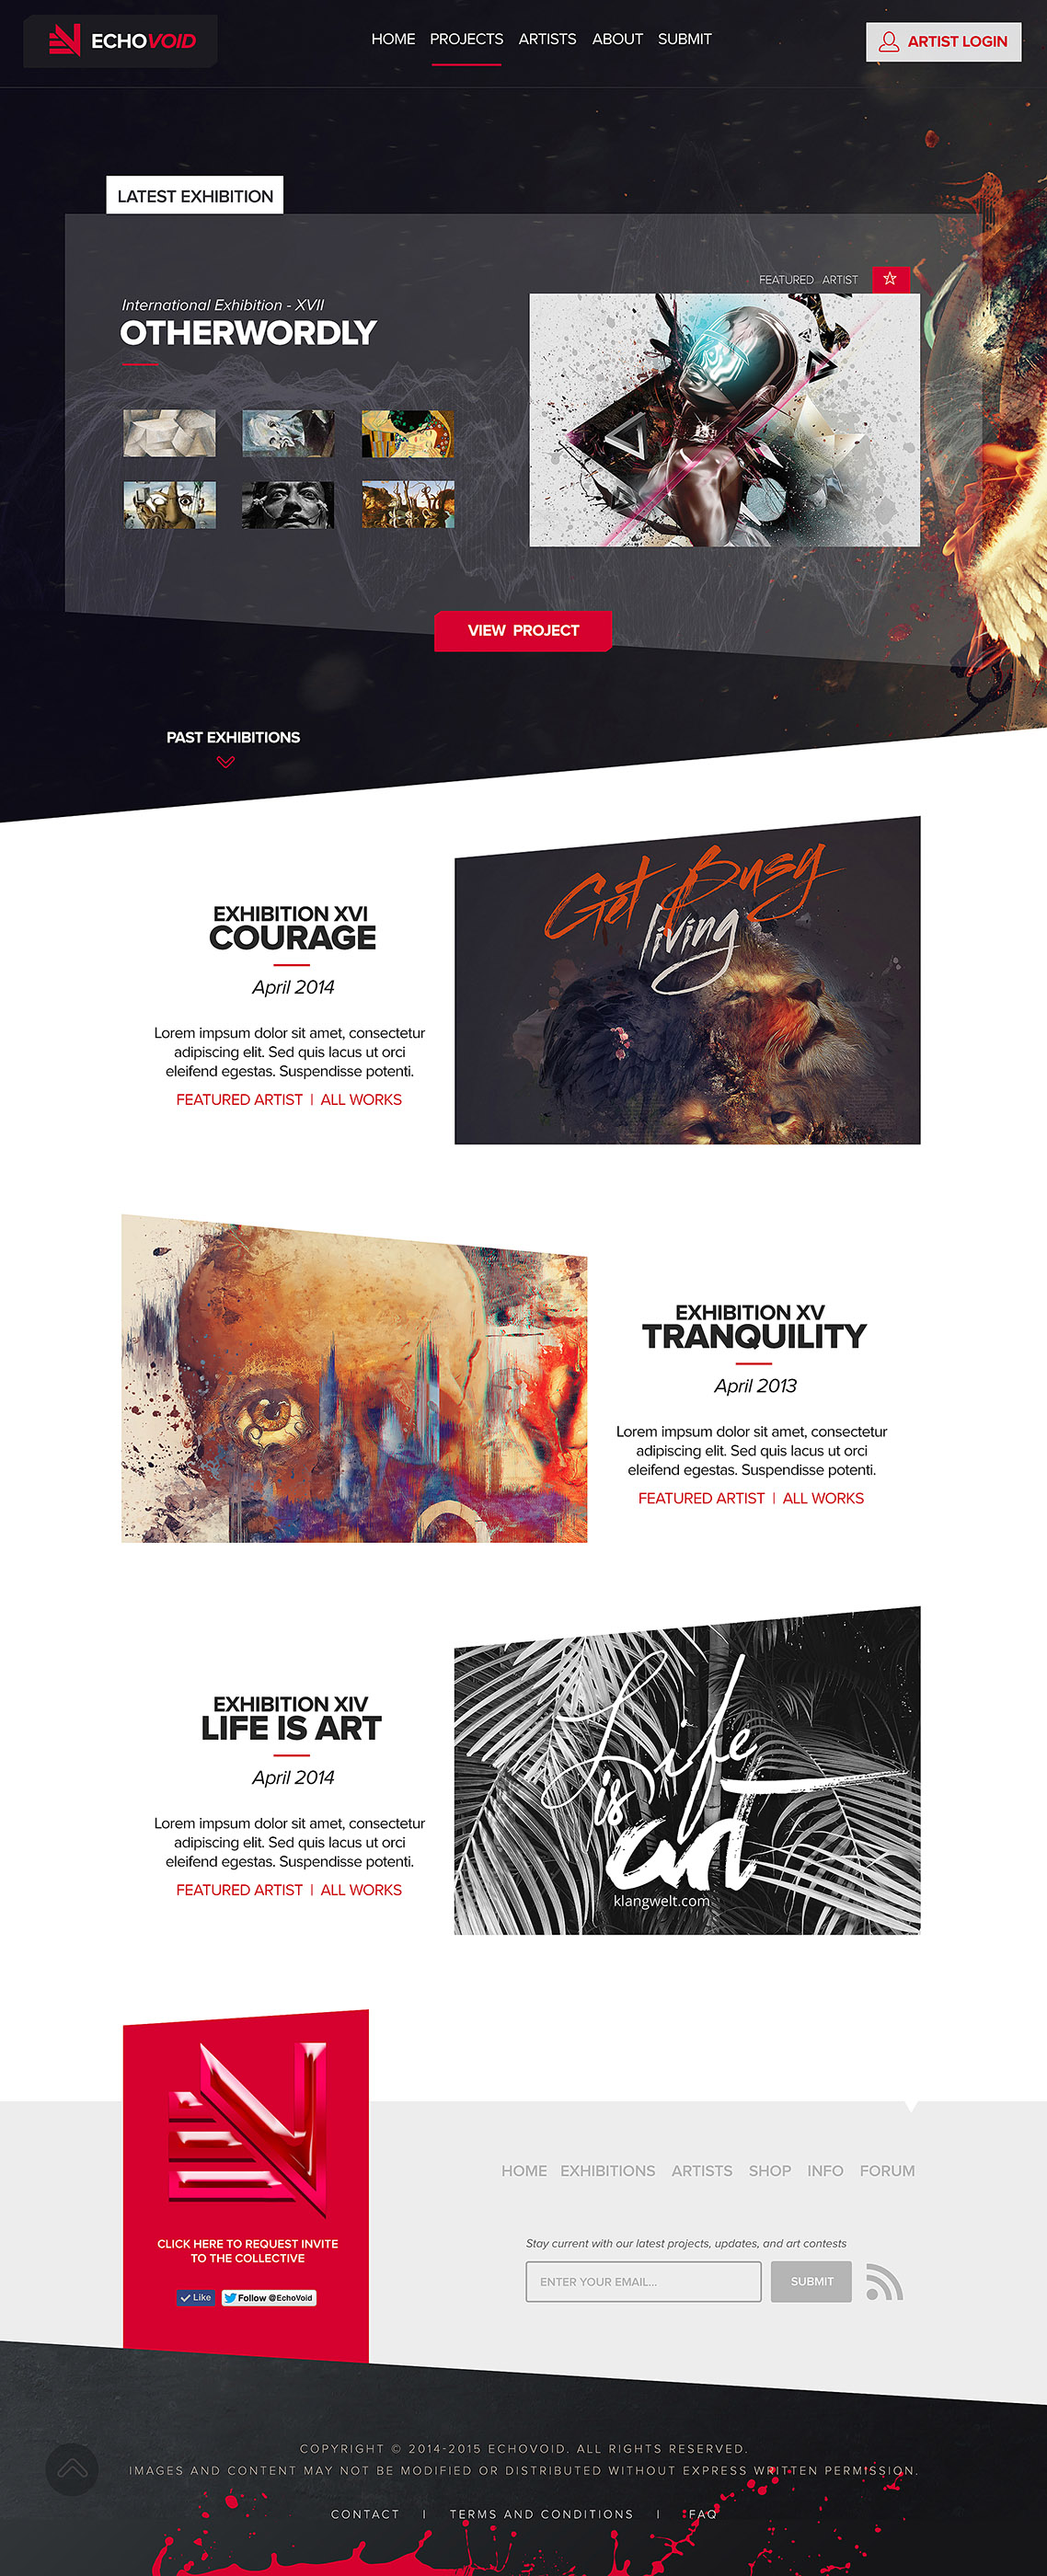 EchoVoid Web Design - Projects Page